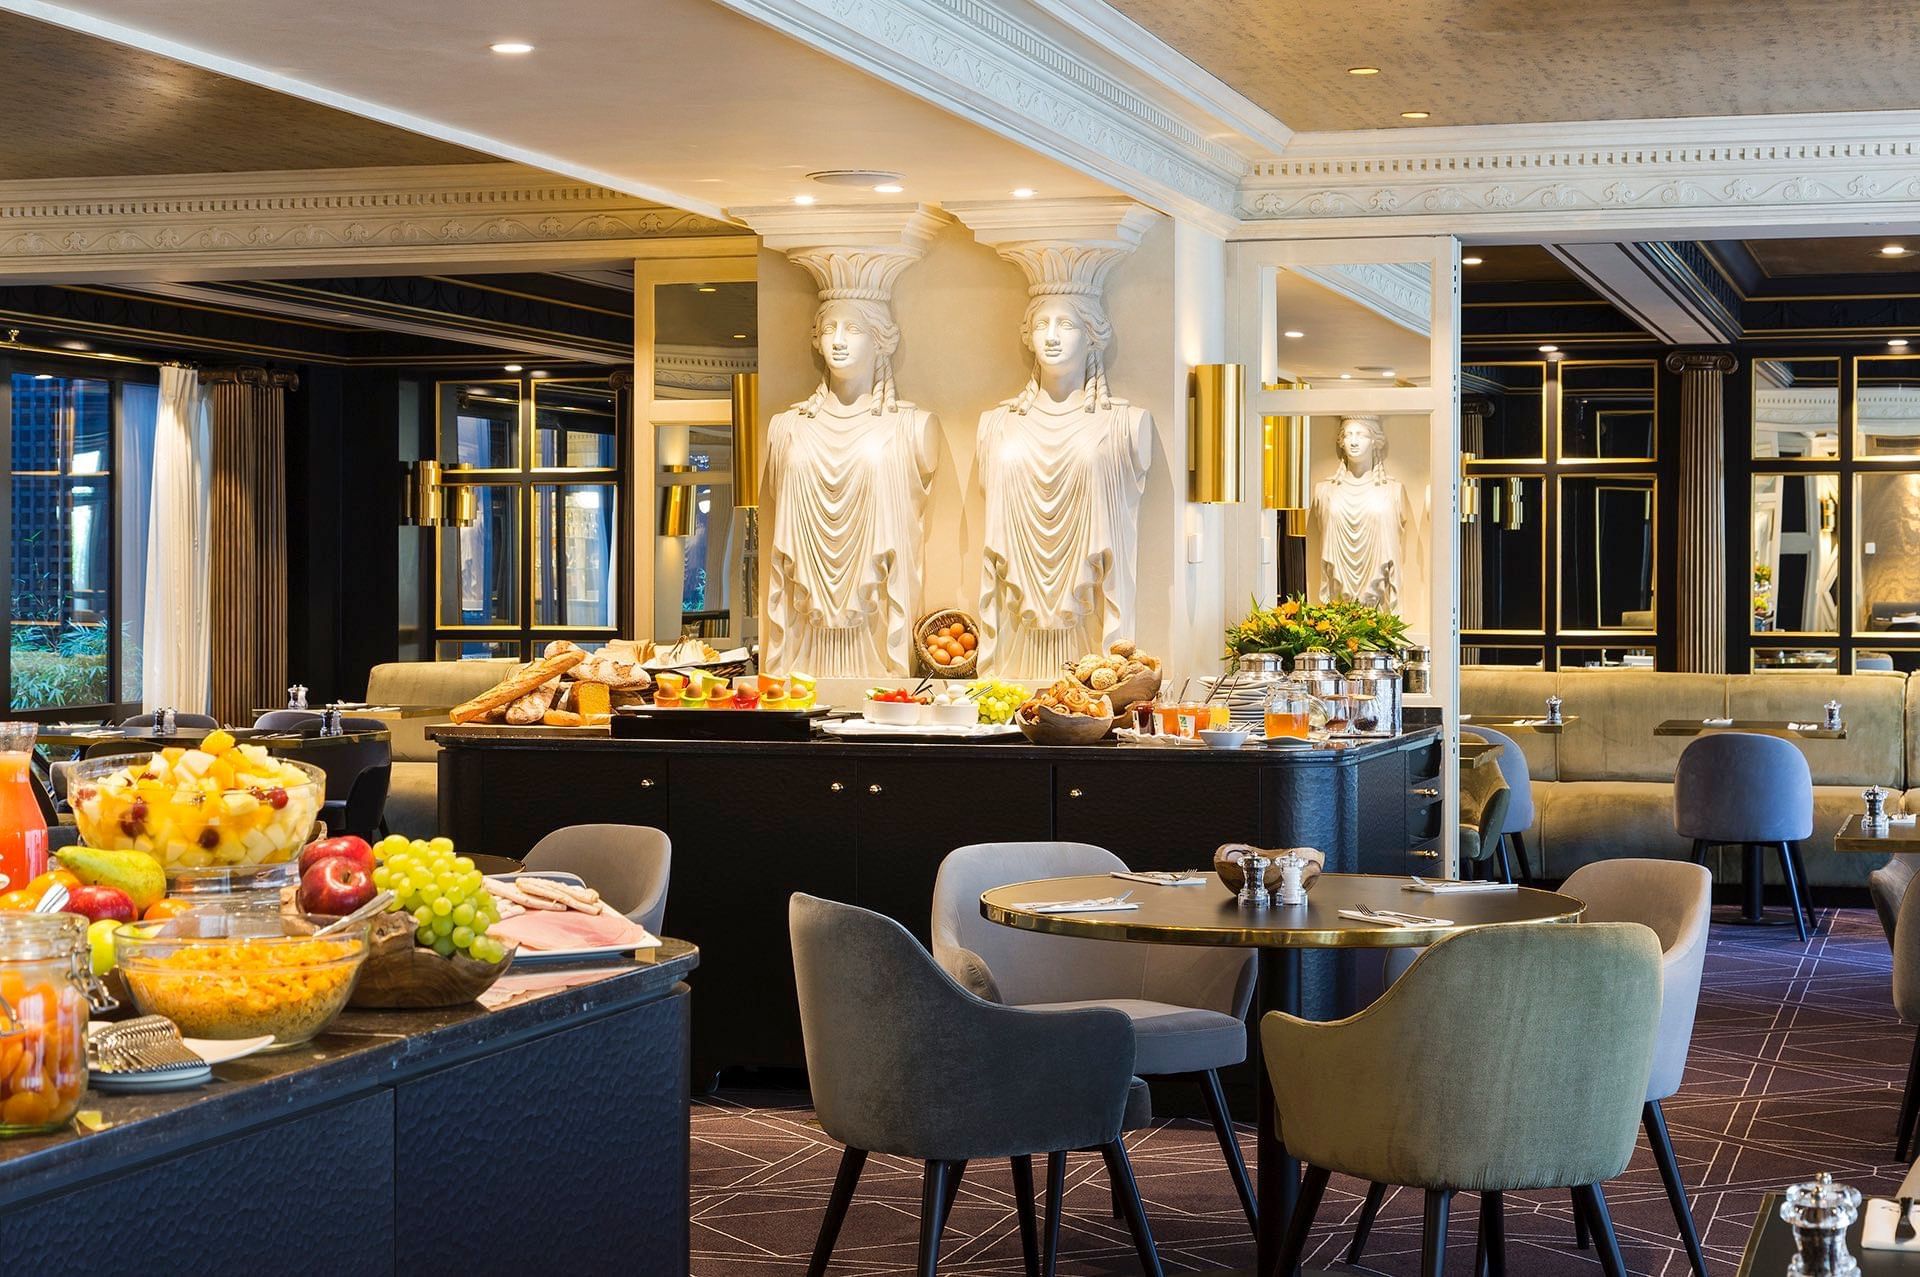 The Avenue ontbijtbuffet in Hotel Barsey by Warwick